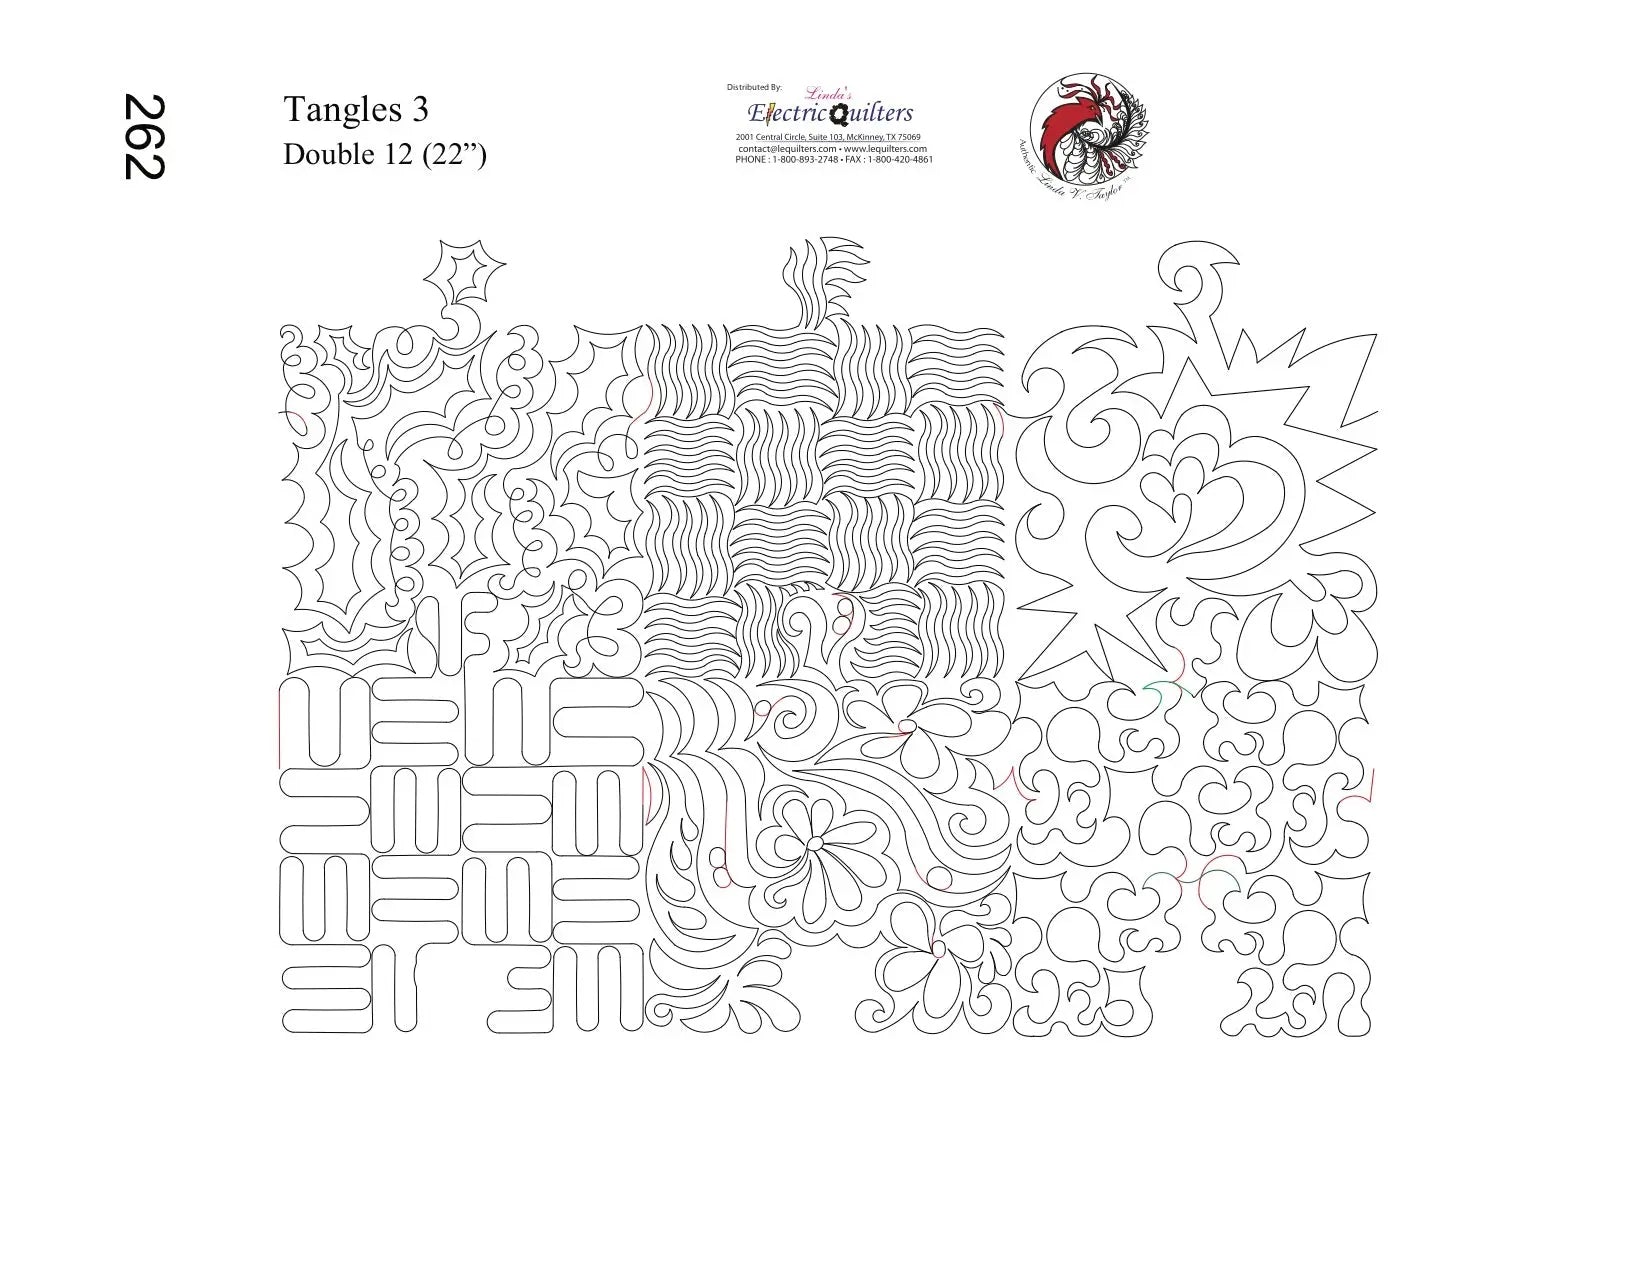 262 Tangles 3 Pantograph by Linda V. Taylor - Linda's Electric Quilters